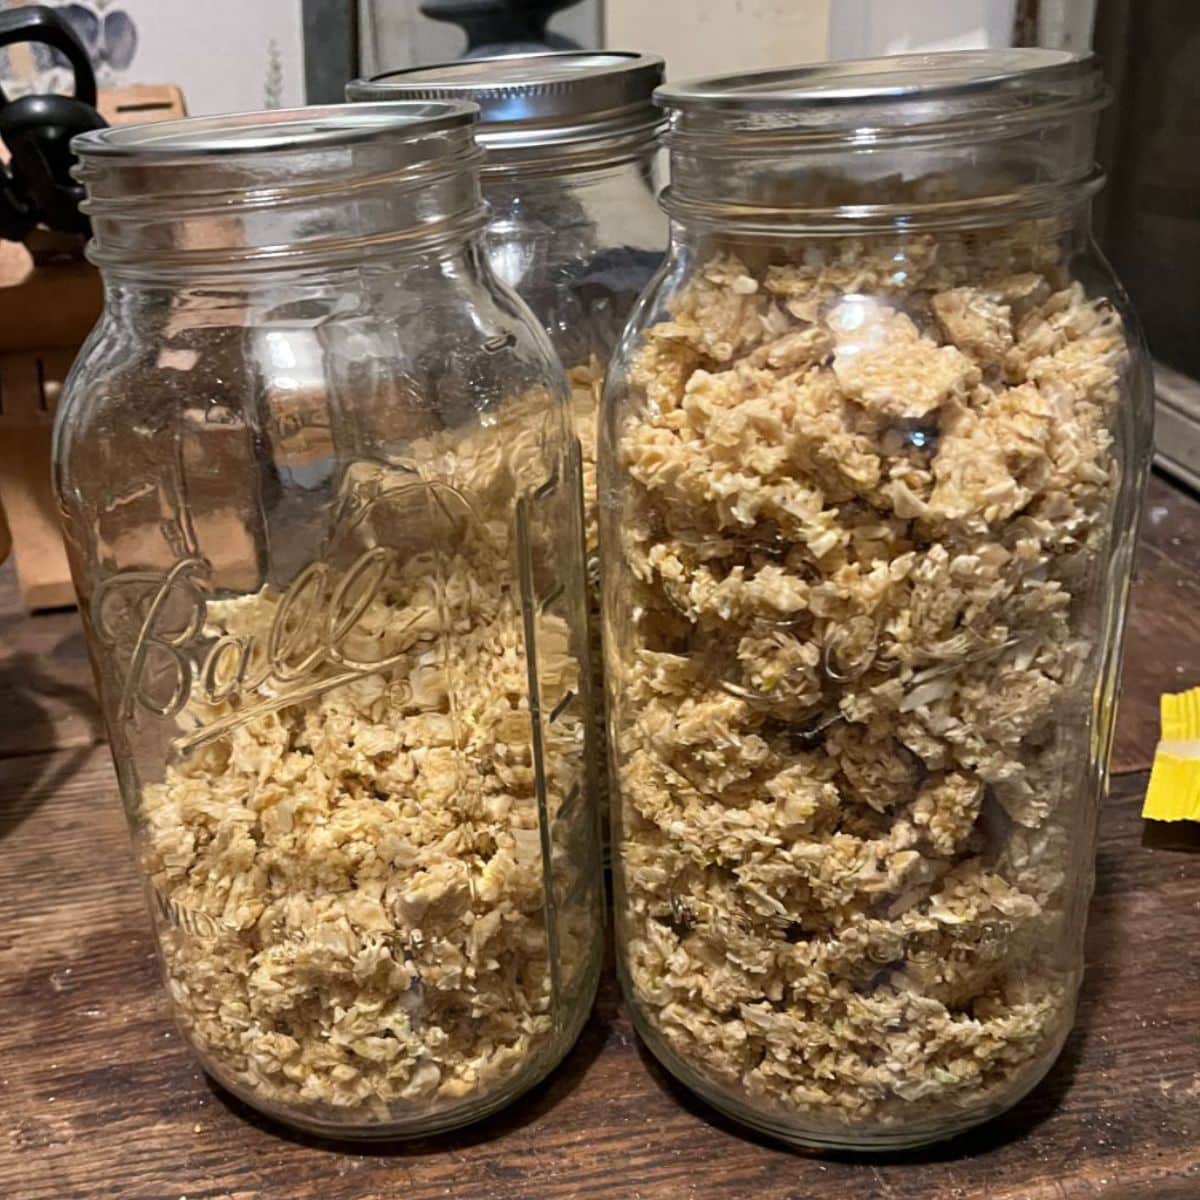 Dehydrated garlic stored in two canning jars.